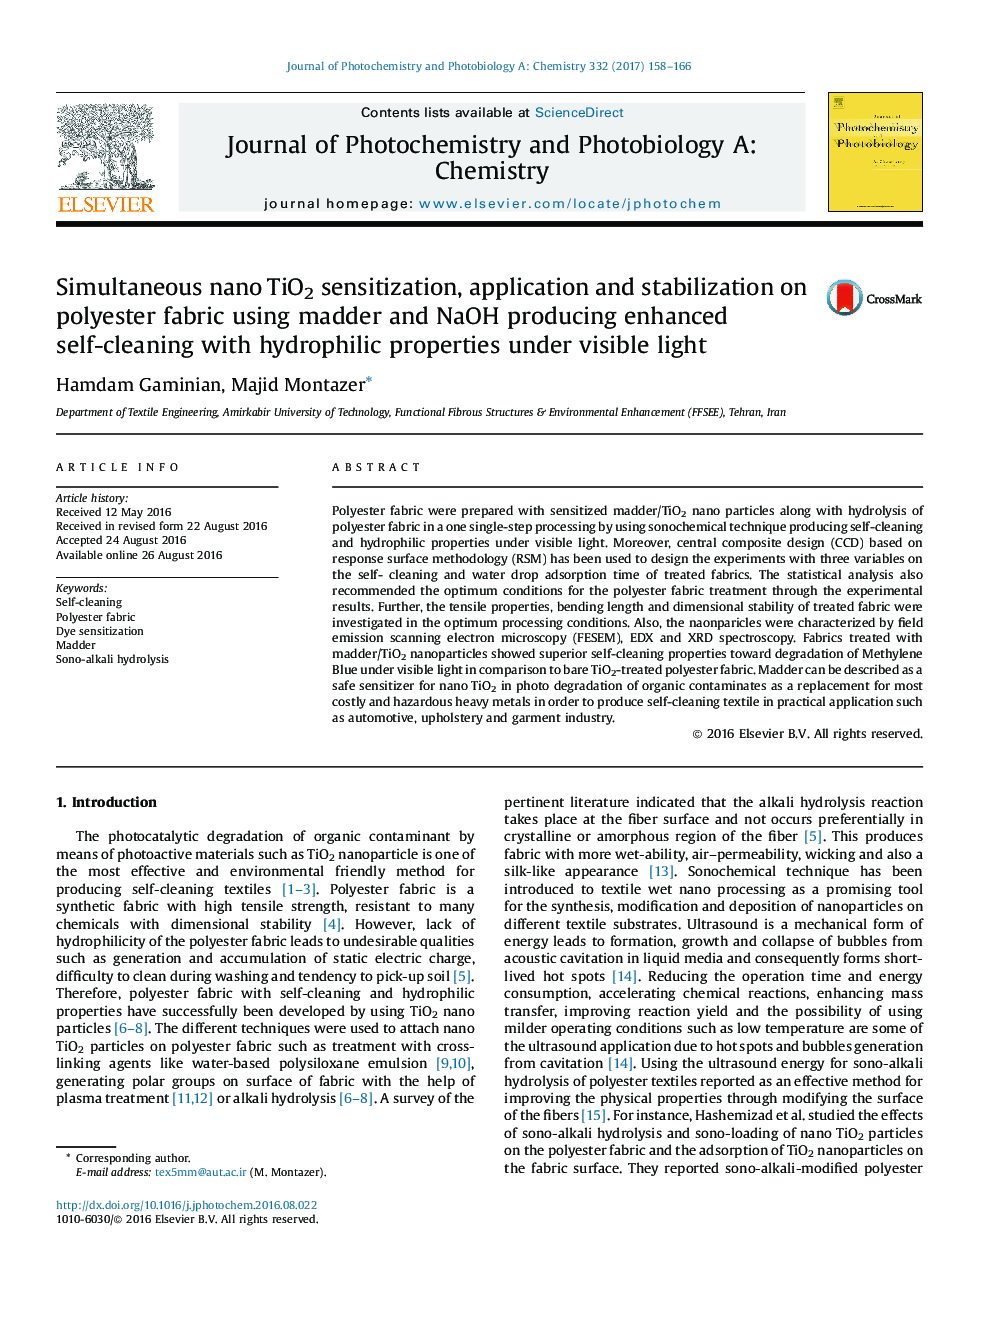 Simultaneous nano TiO2 sensitization, application and stabilization on polyester fabric using madder and NaOH producing enhanced self-cleaning with hydrophilic properties under visible light